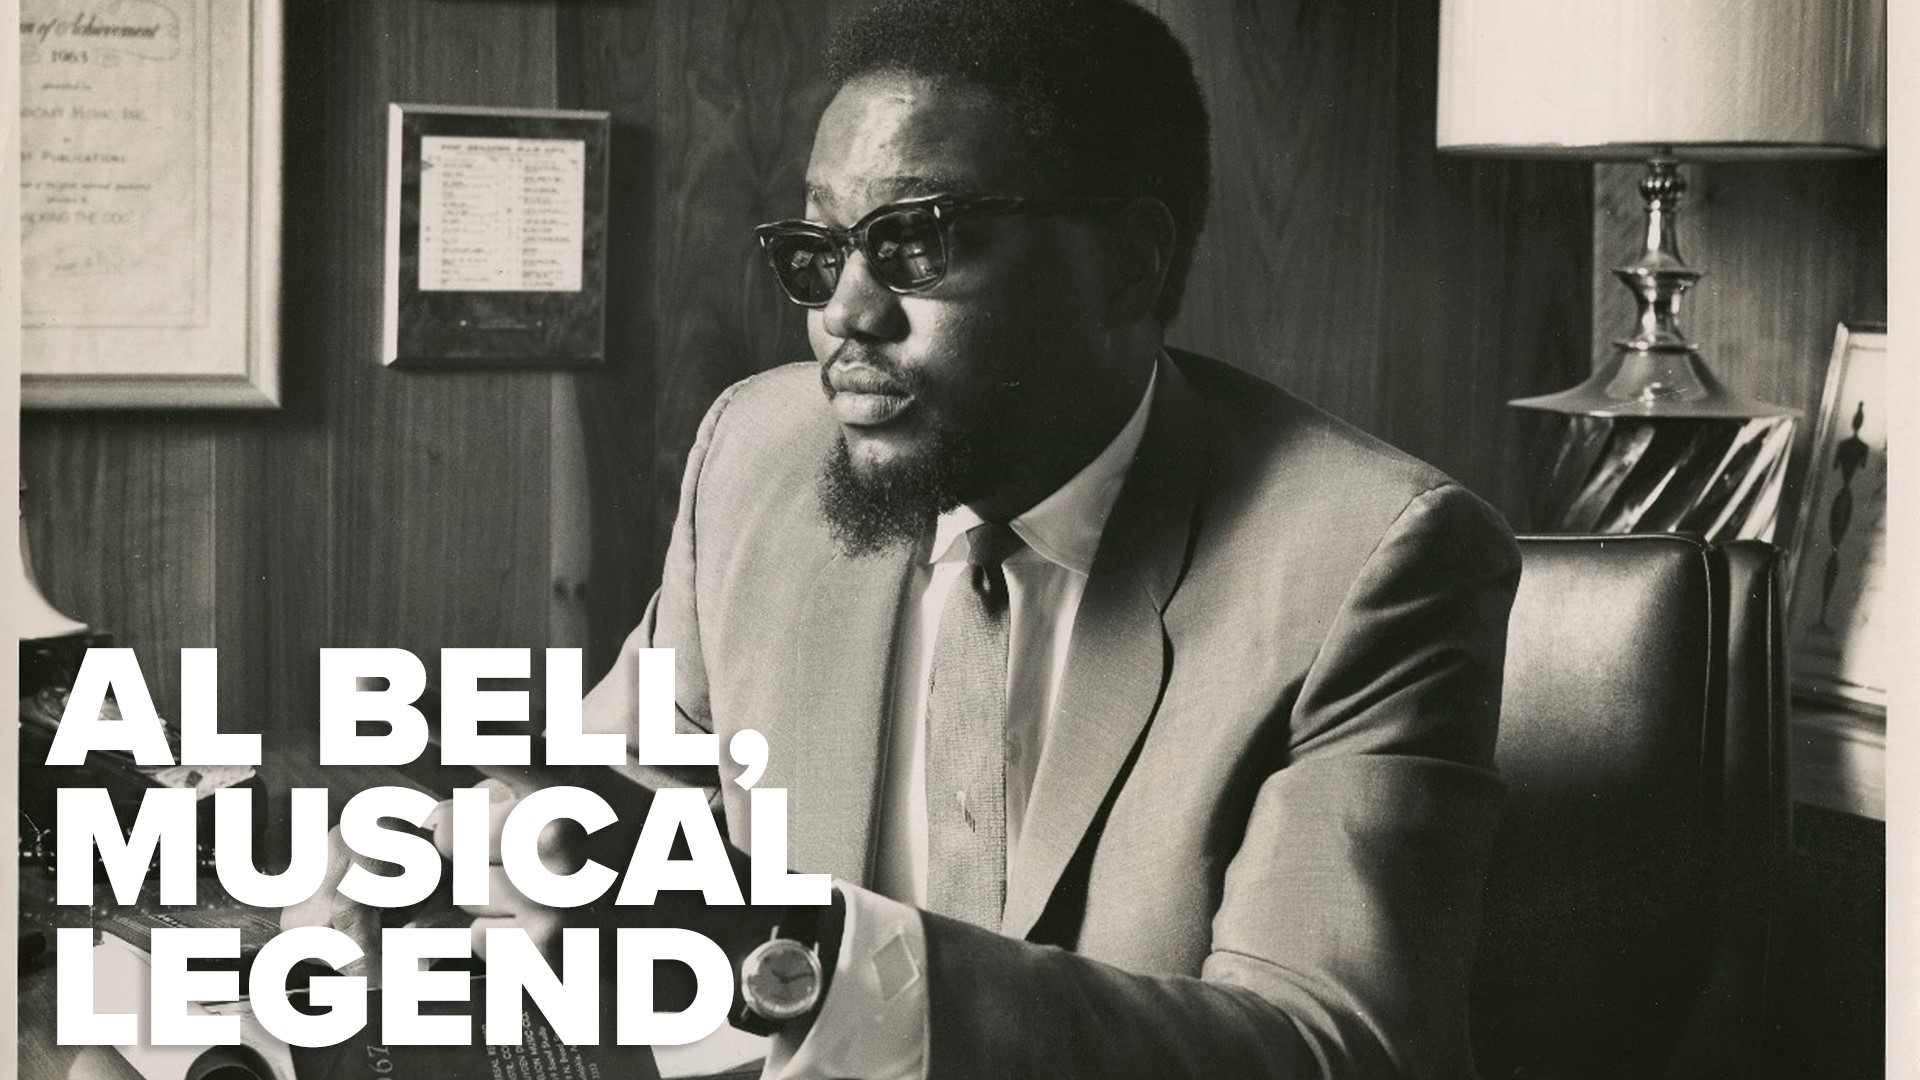 Al Bell started his career in Arkansas going from student president to a disc jockey, which he parlayed into becoming one of the most iconic music producers.